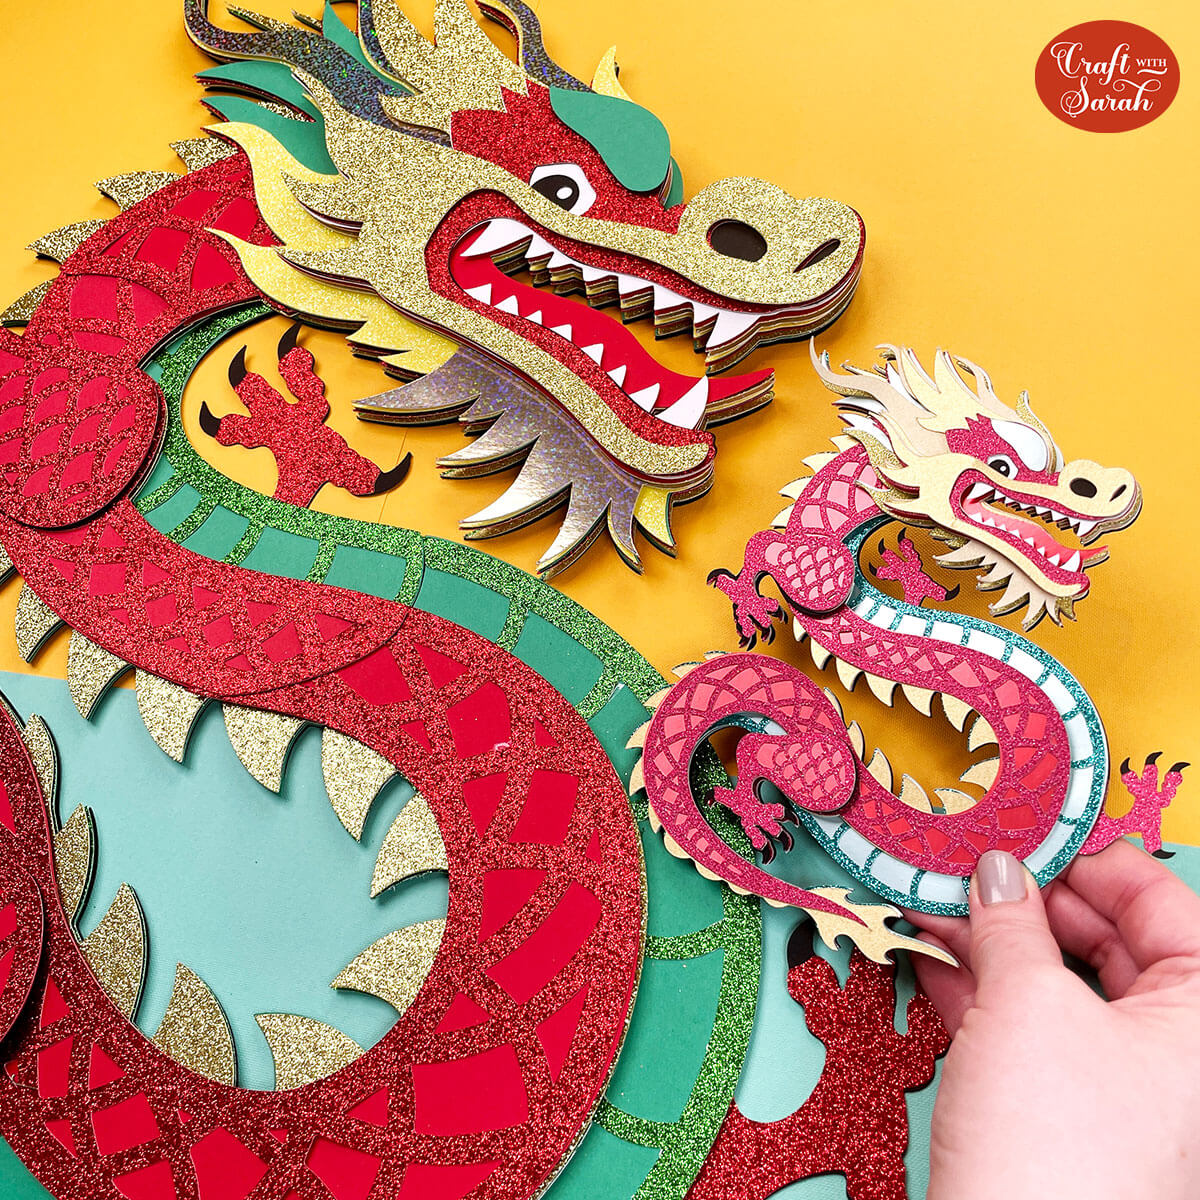 Chinese Dragon SVG 🐉 Celebrate the Year of the Dragon